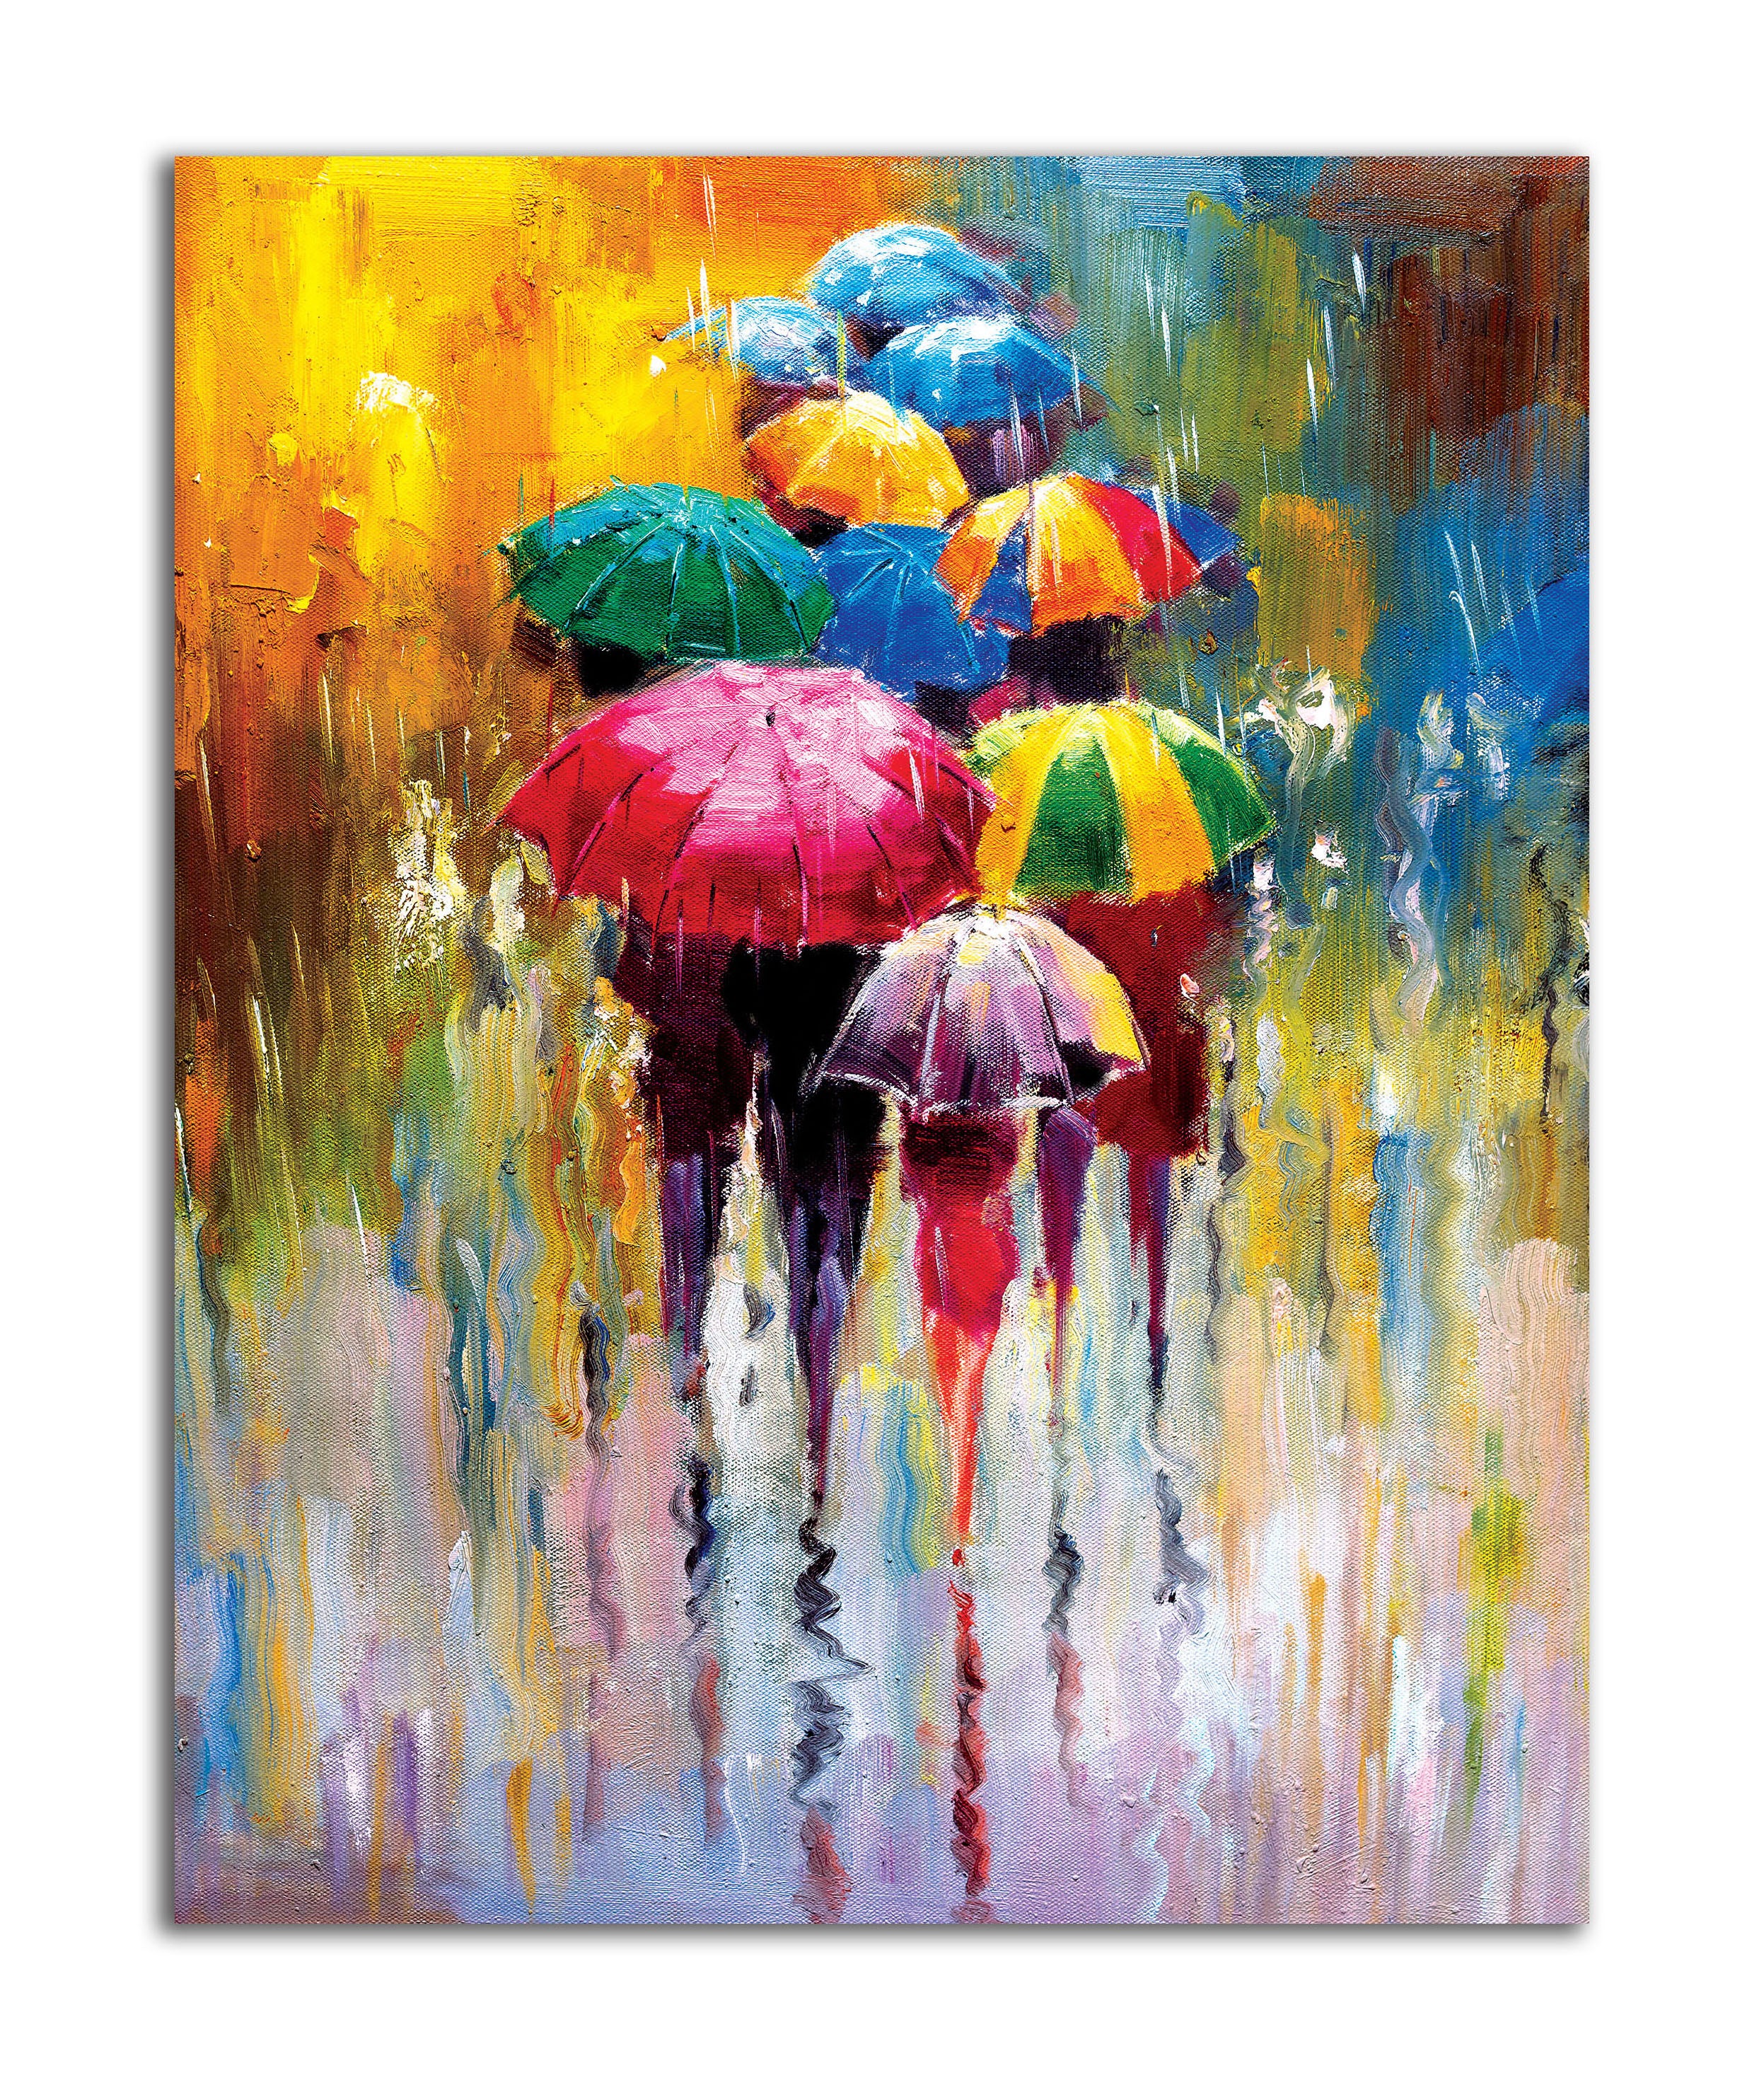 Abstract Umbrella  - Canvas Painting - Unframed